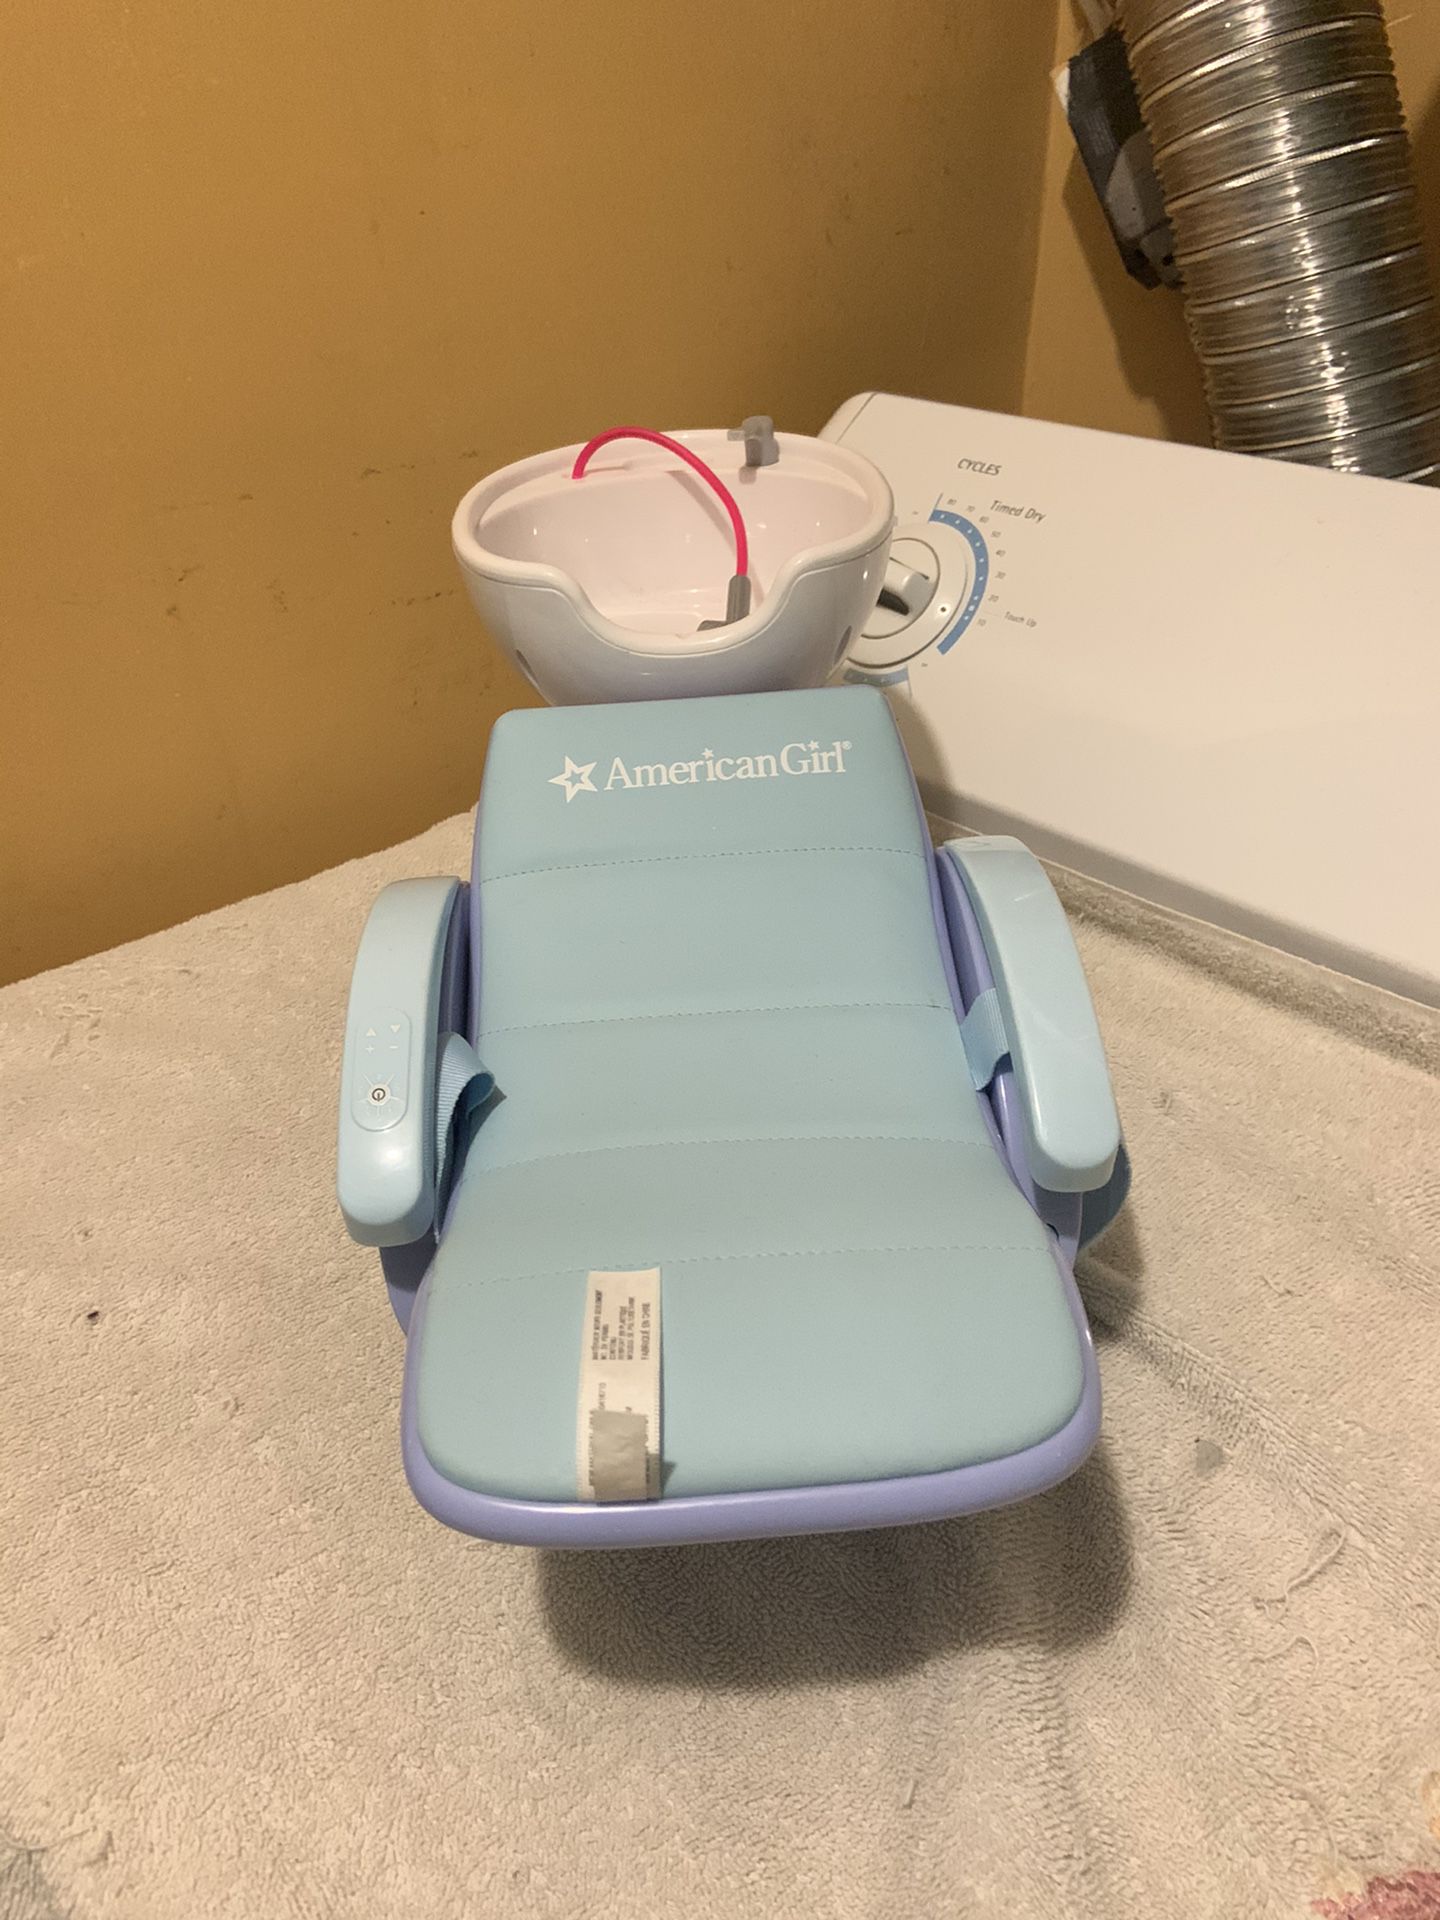 American girl spa chair for 18” doll